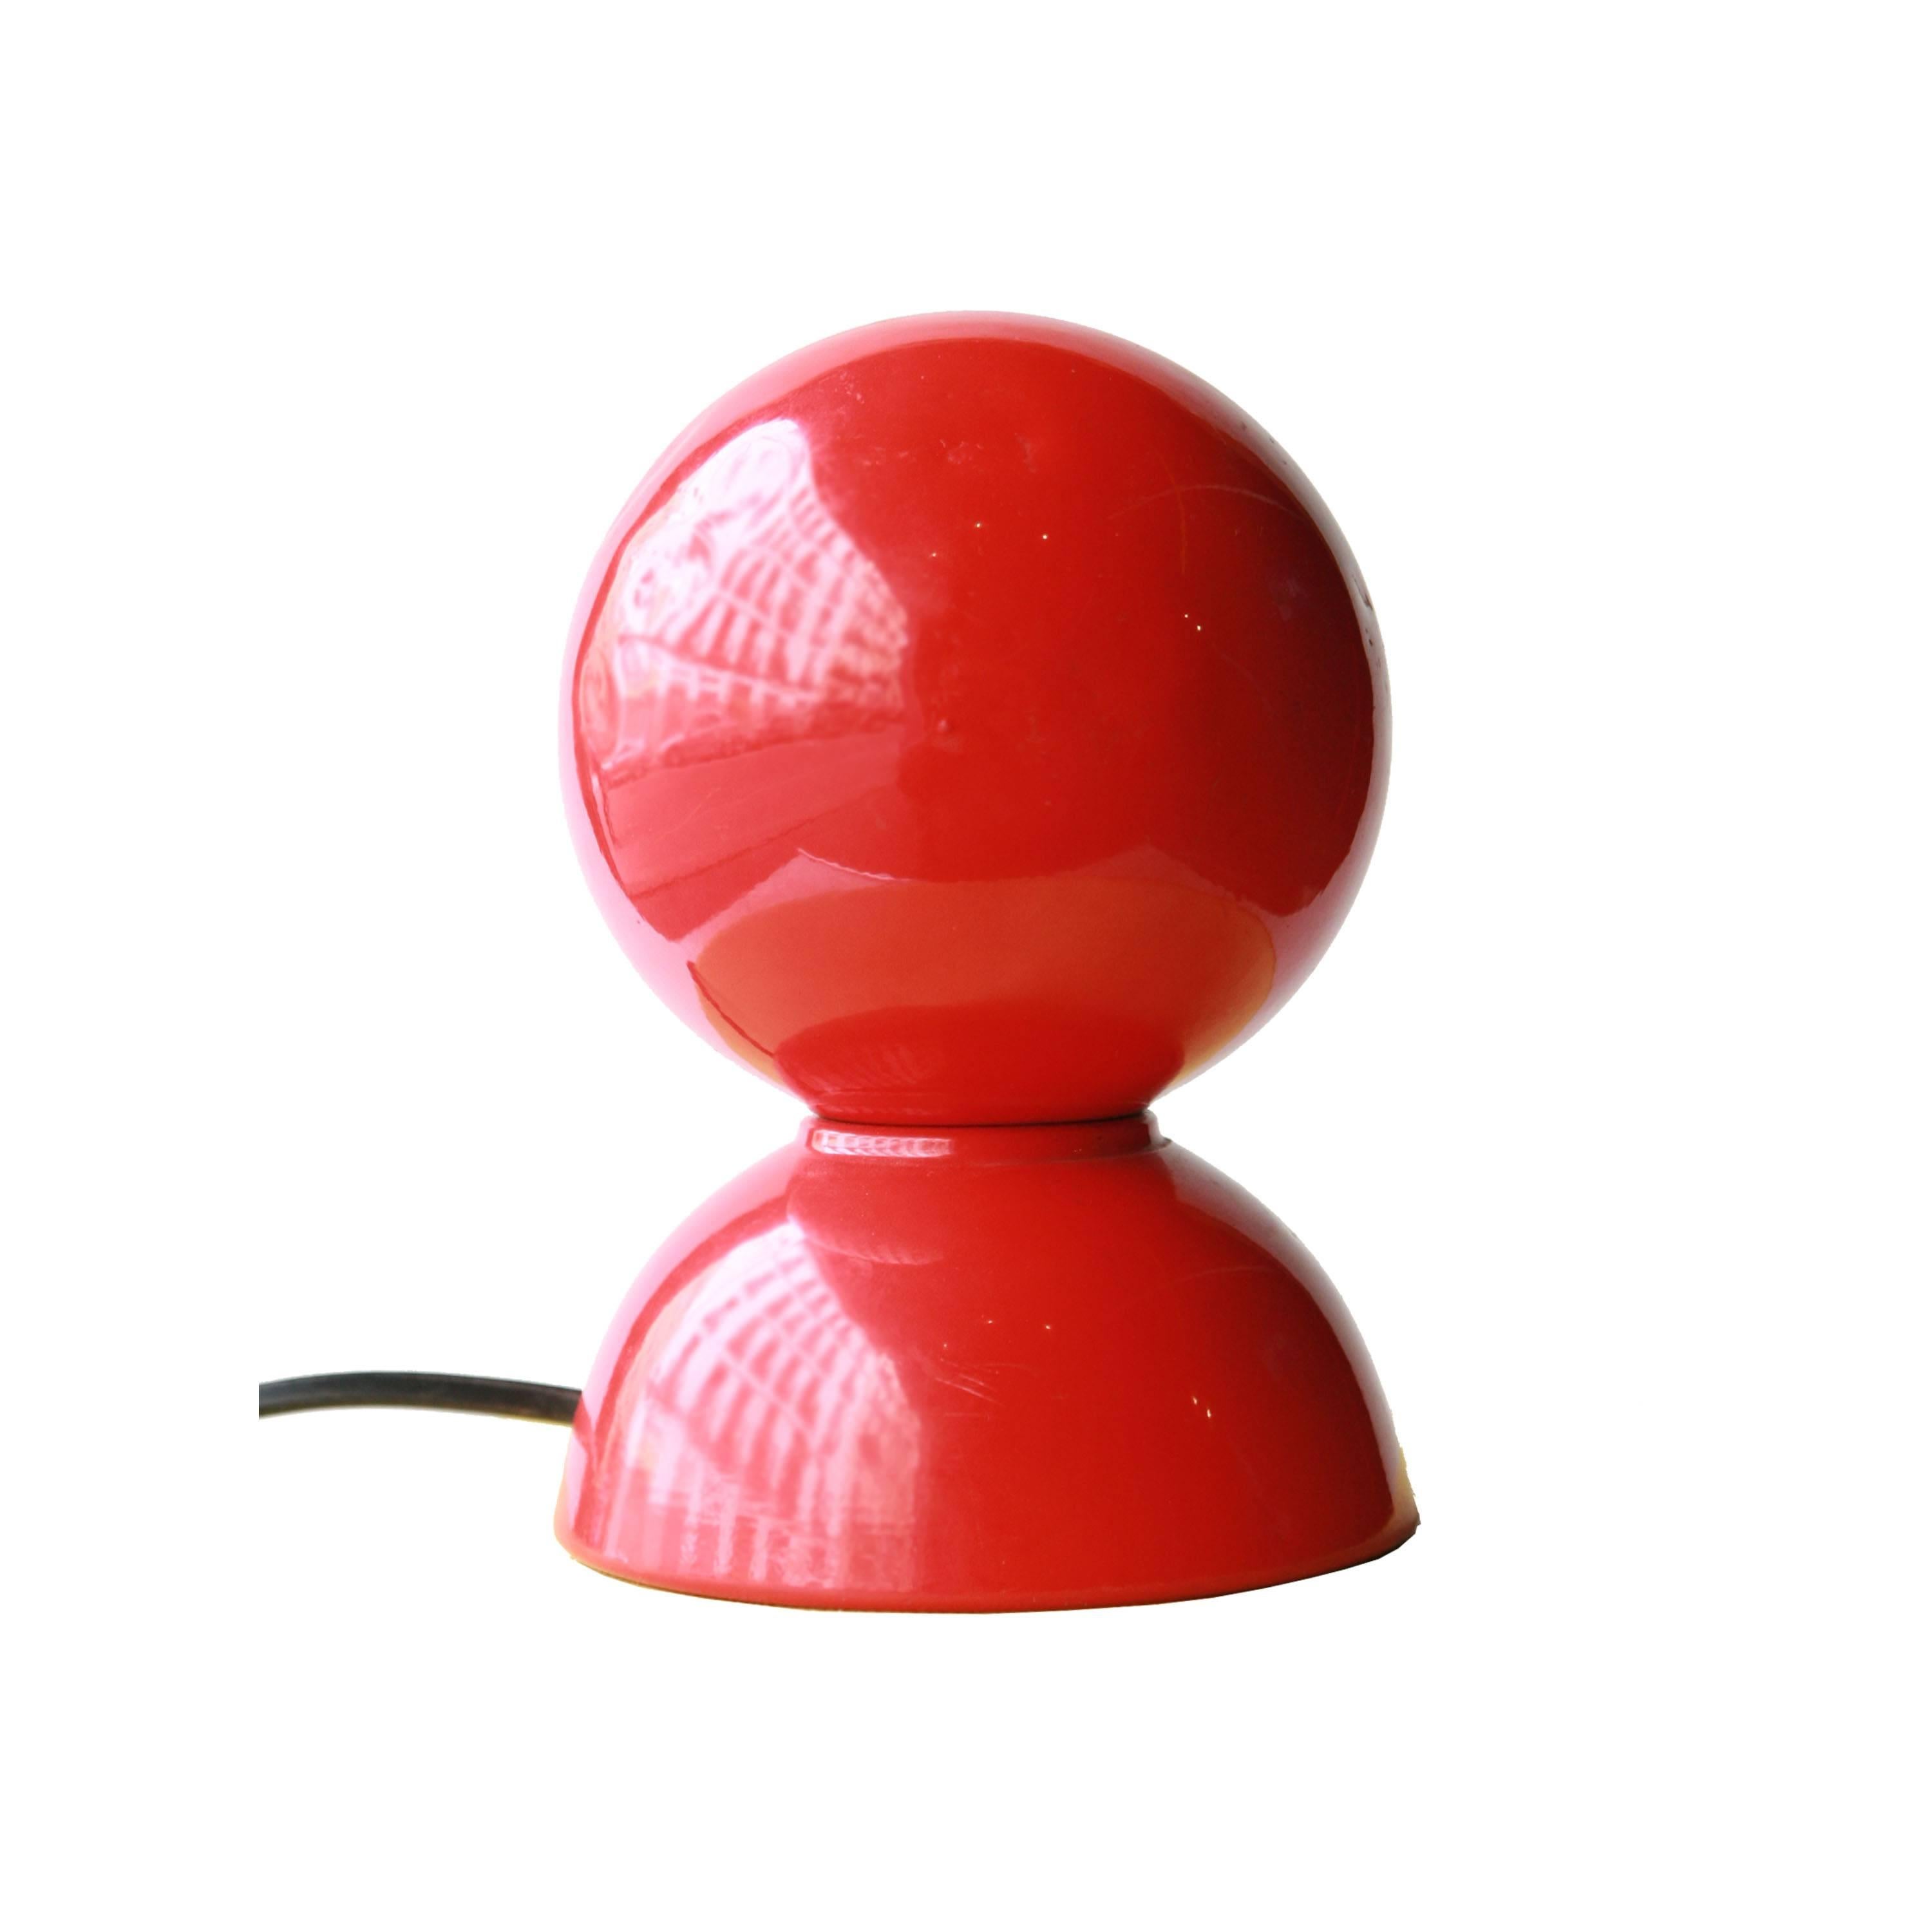 Mid-Century Modern Table Lamp 'Eclipse' Designed by Vico Magistretti, Italy, 1960